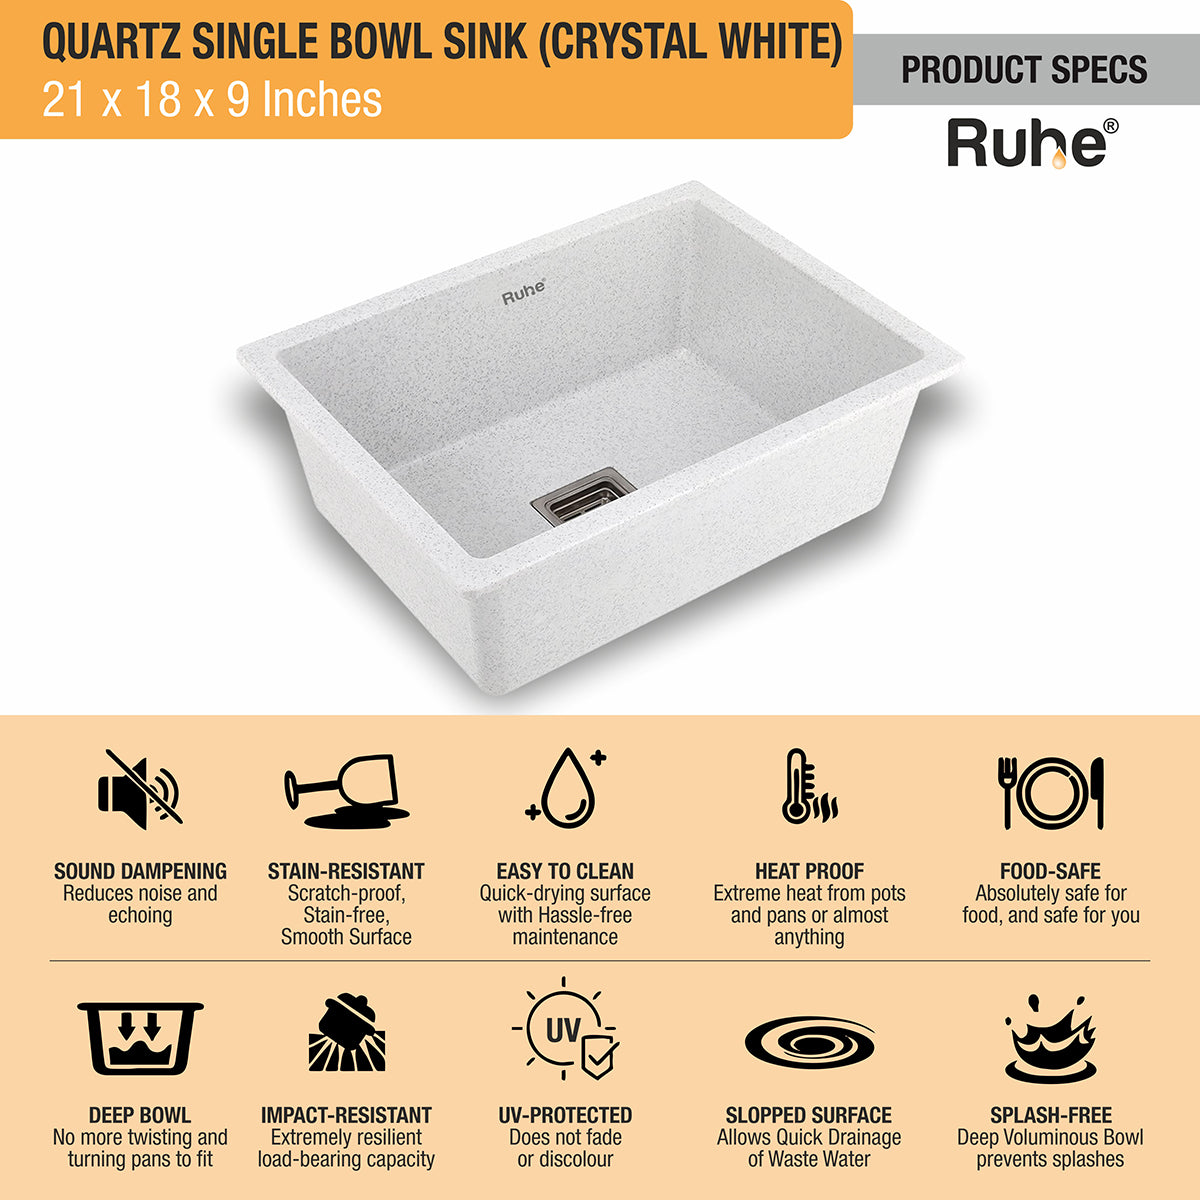 Quartz Crystal White Single Bowl Kitchen Sink (21 x 18 x 9 inches) features and benefits